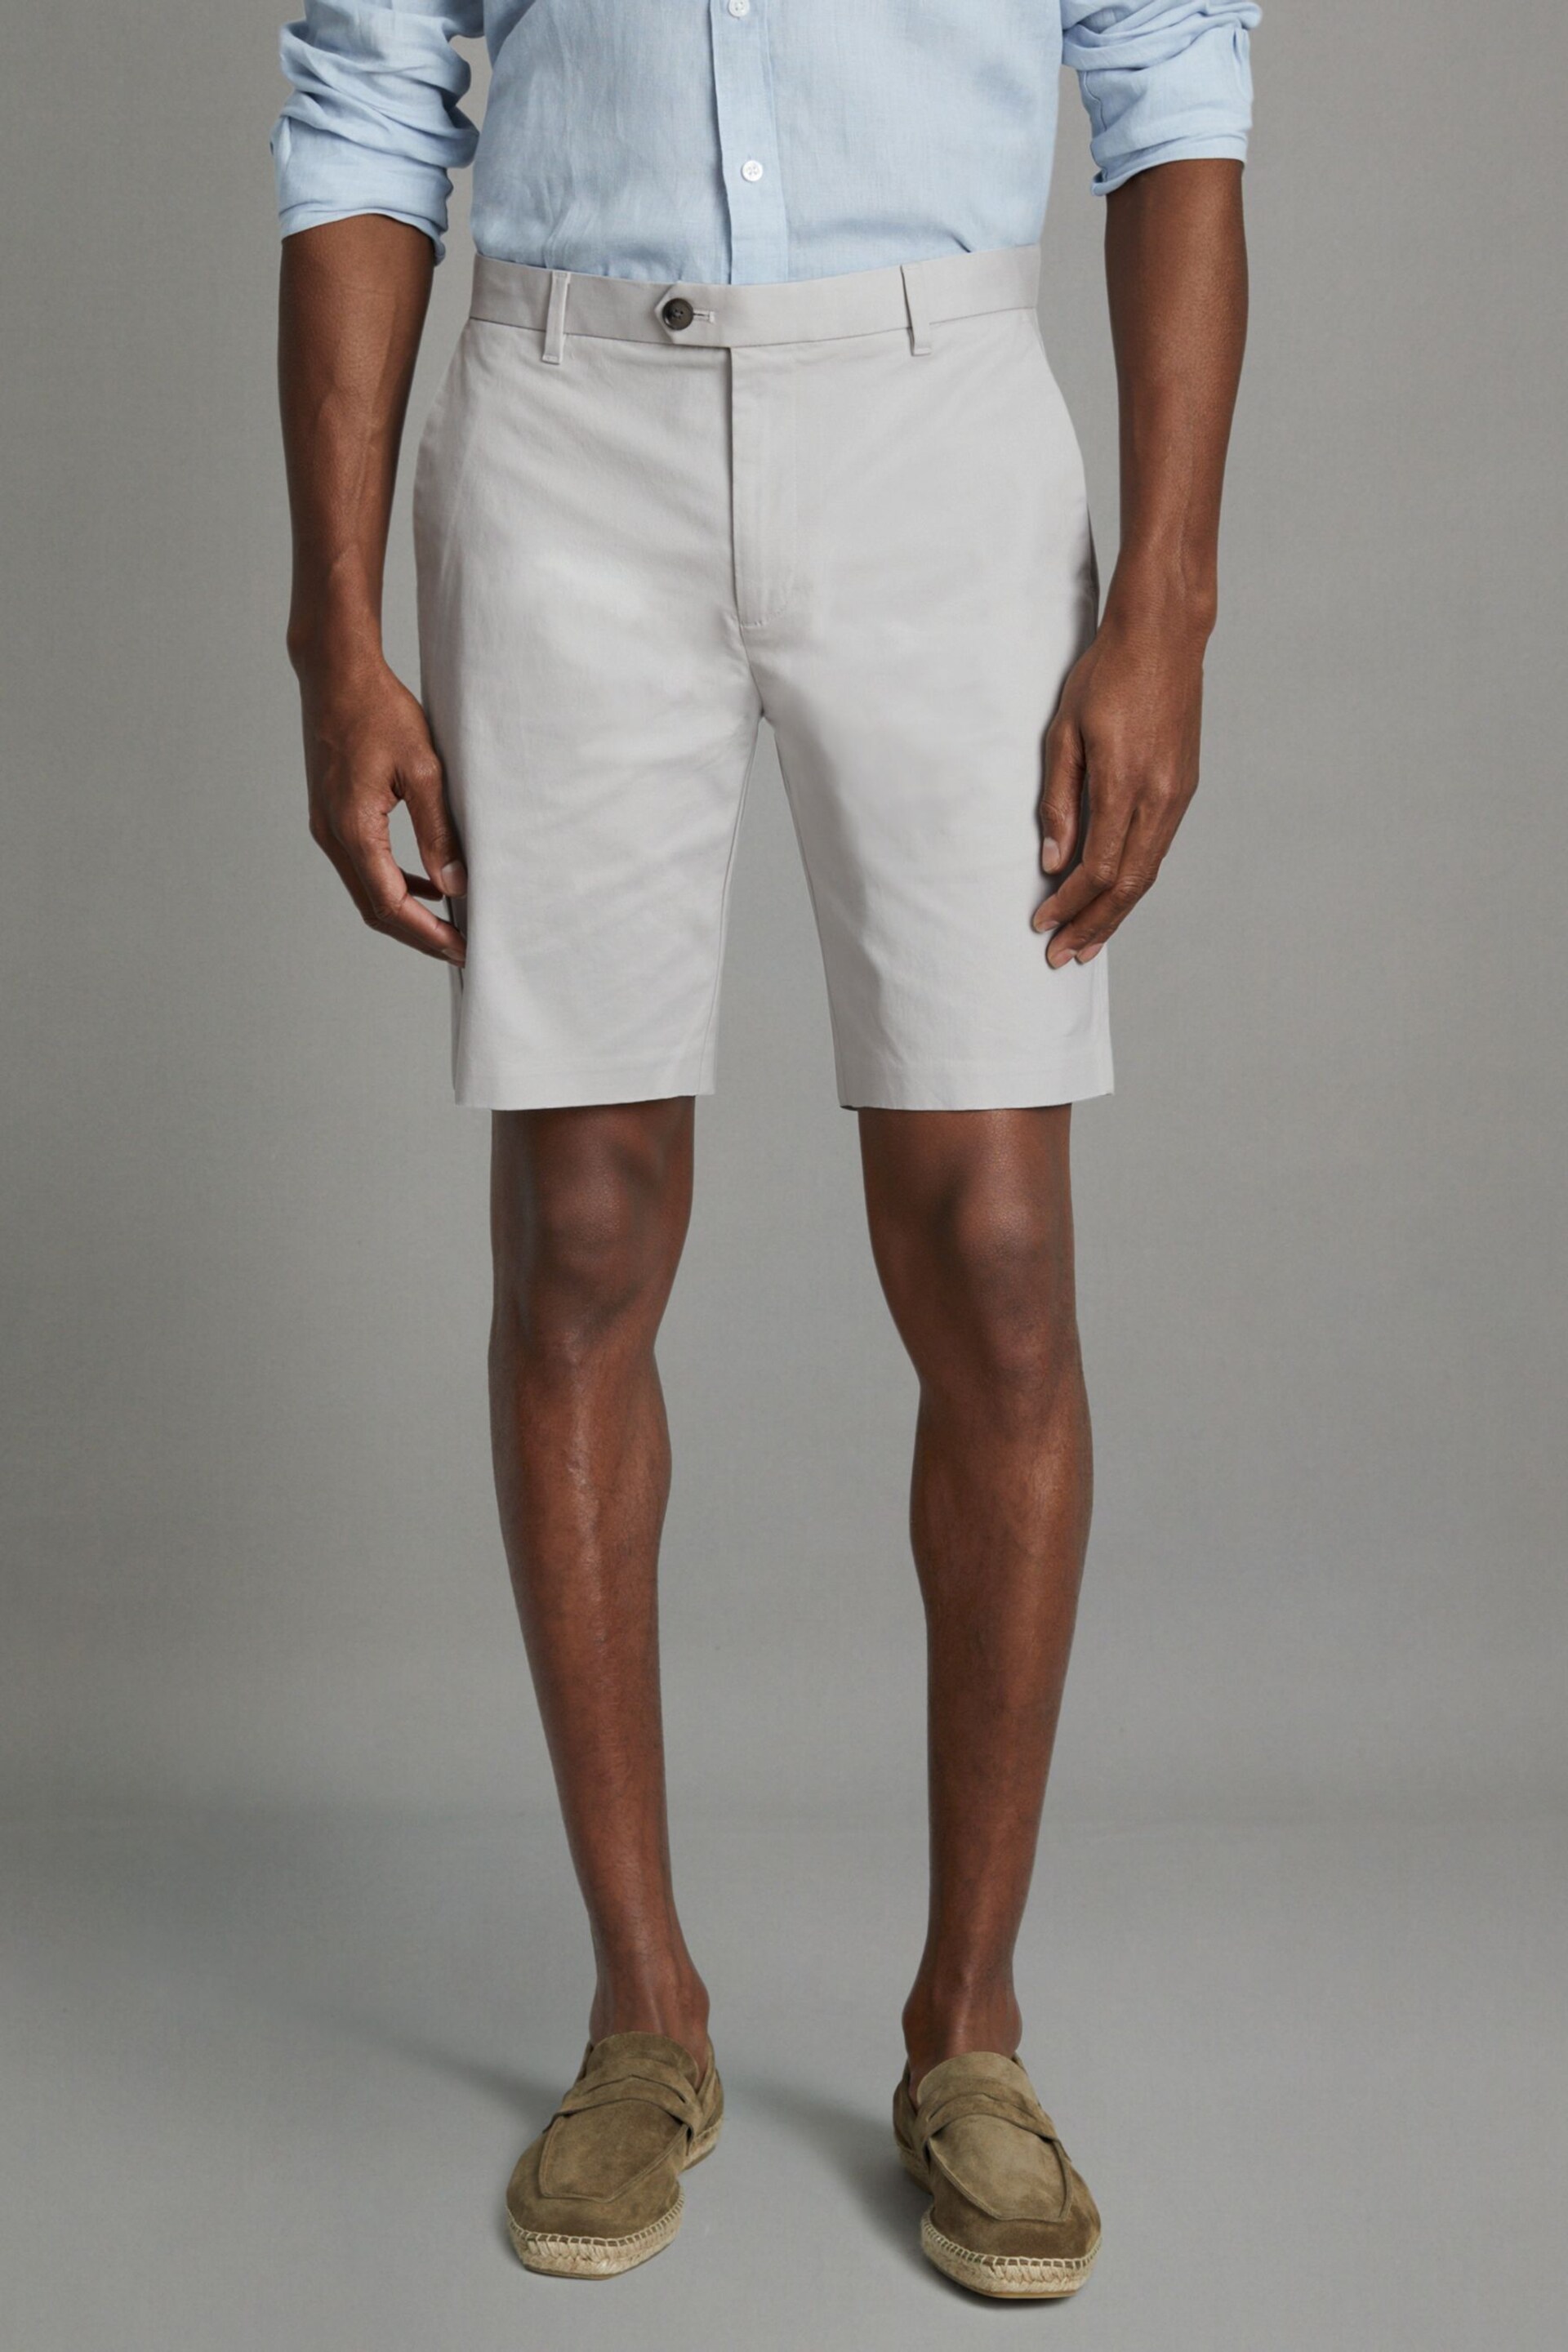 Reiss Ice Grey Wicket Modern Fit Cotton Blend Chino Shorts - Image 1 of 6